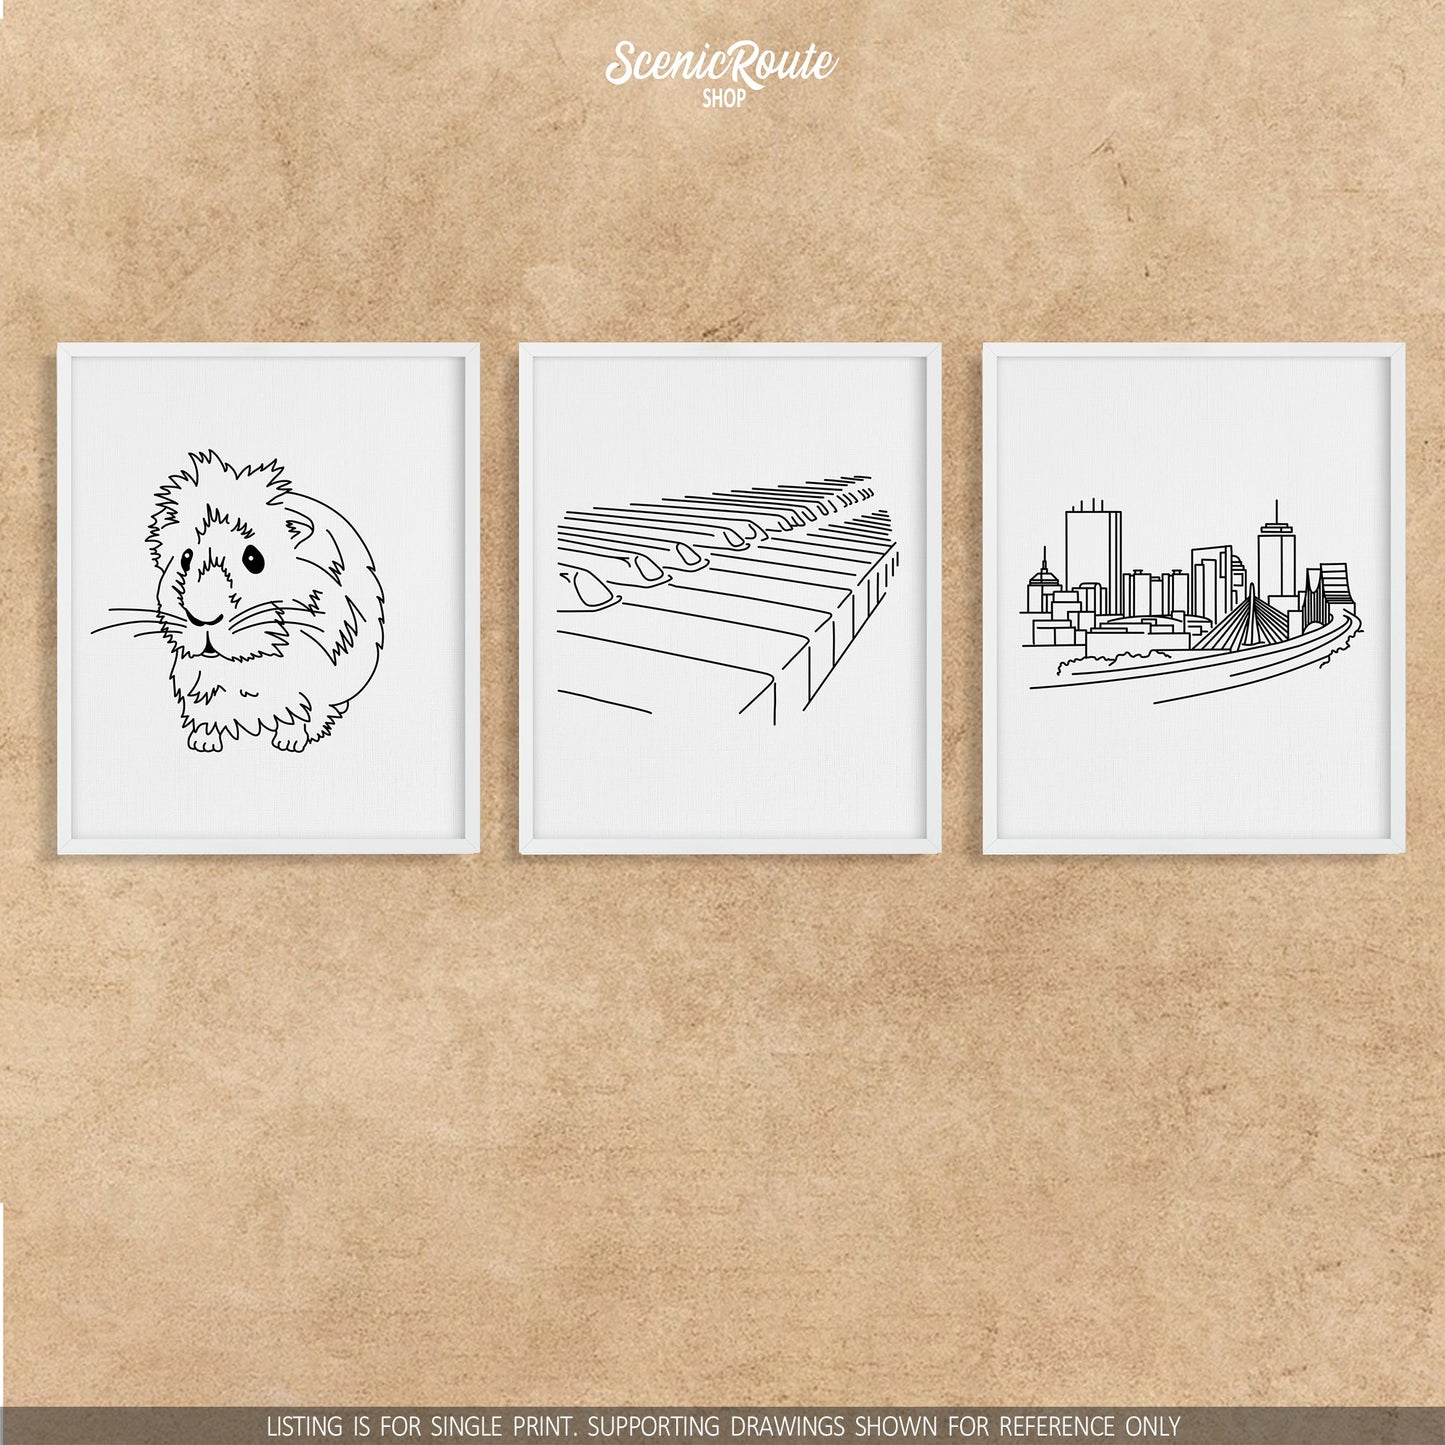 A group of three framed drawings on a tan wall. The line art drawings include a Guinea Pig, a Piano, and the Boston Skyline